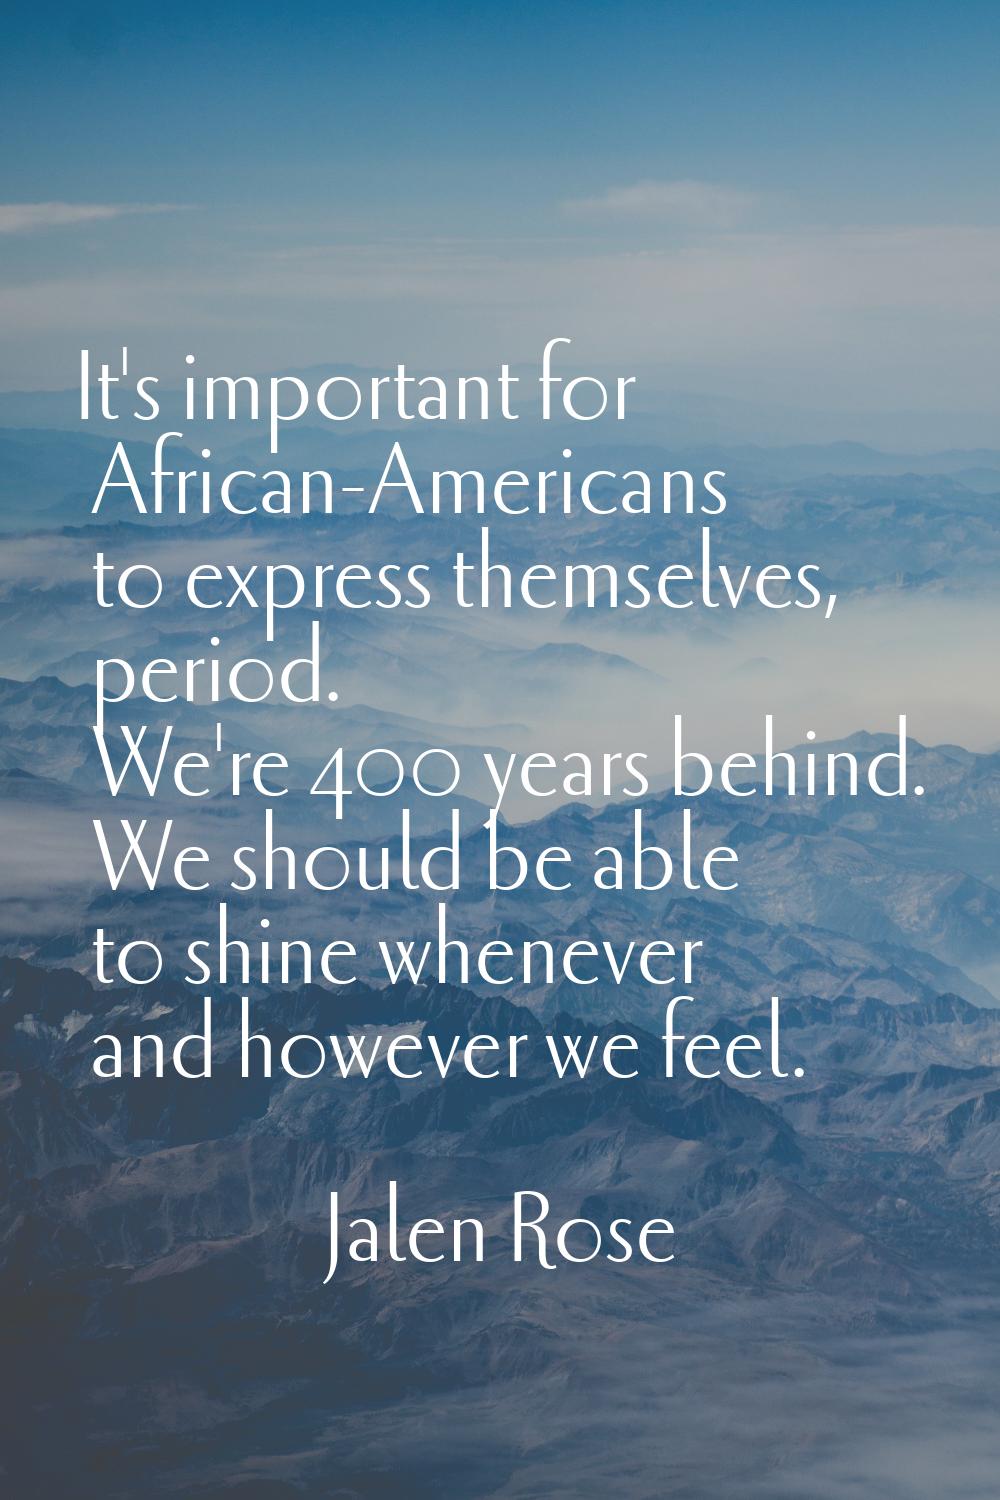 It's important for African-Americans to express themselves, period. We're 400 years behind. We shou